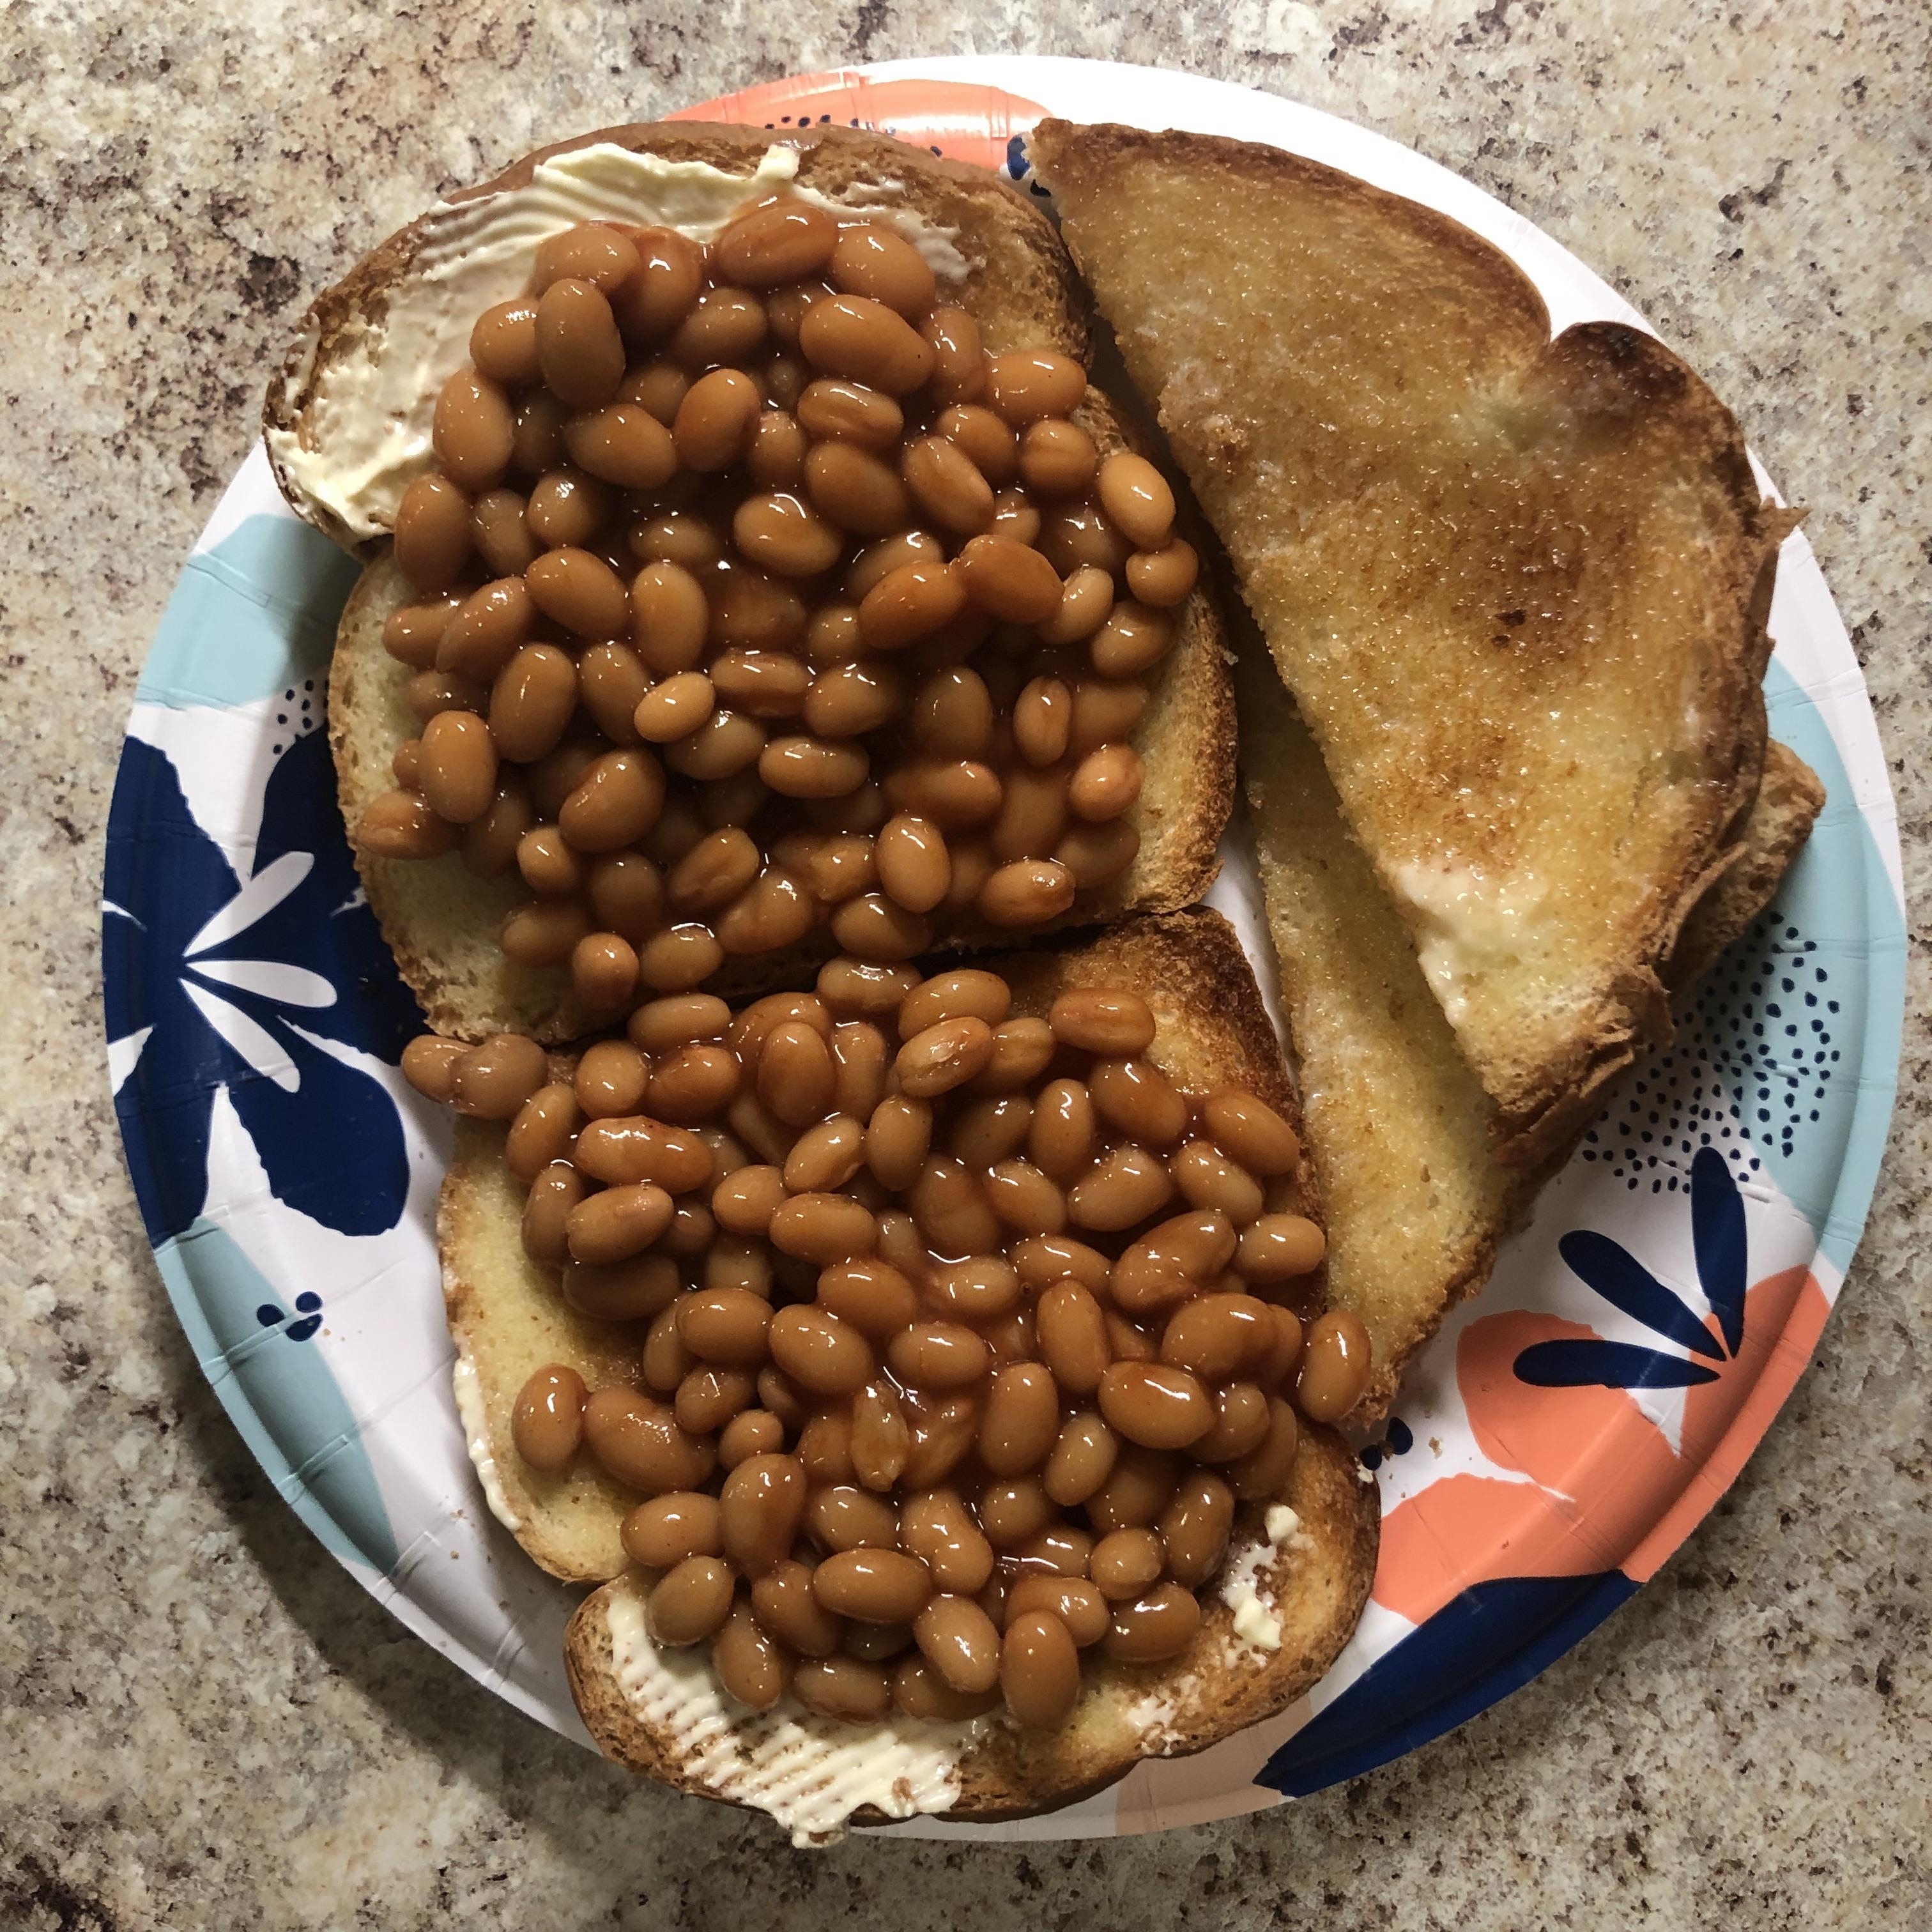 A plate with toast covered in baked beans